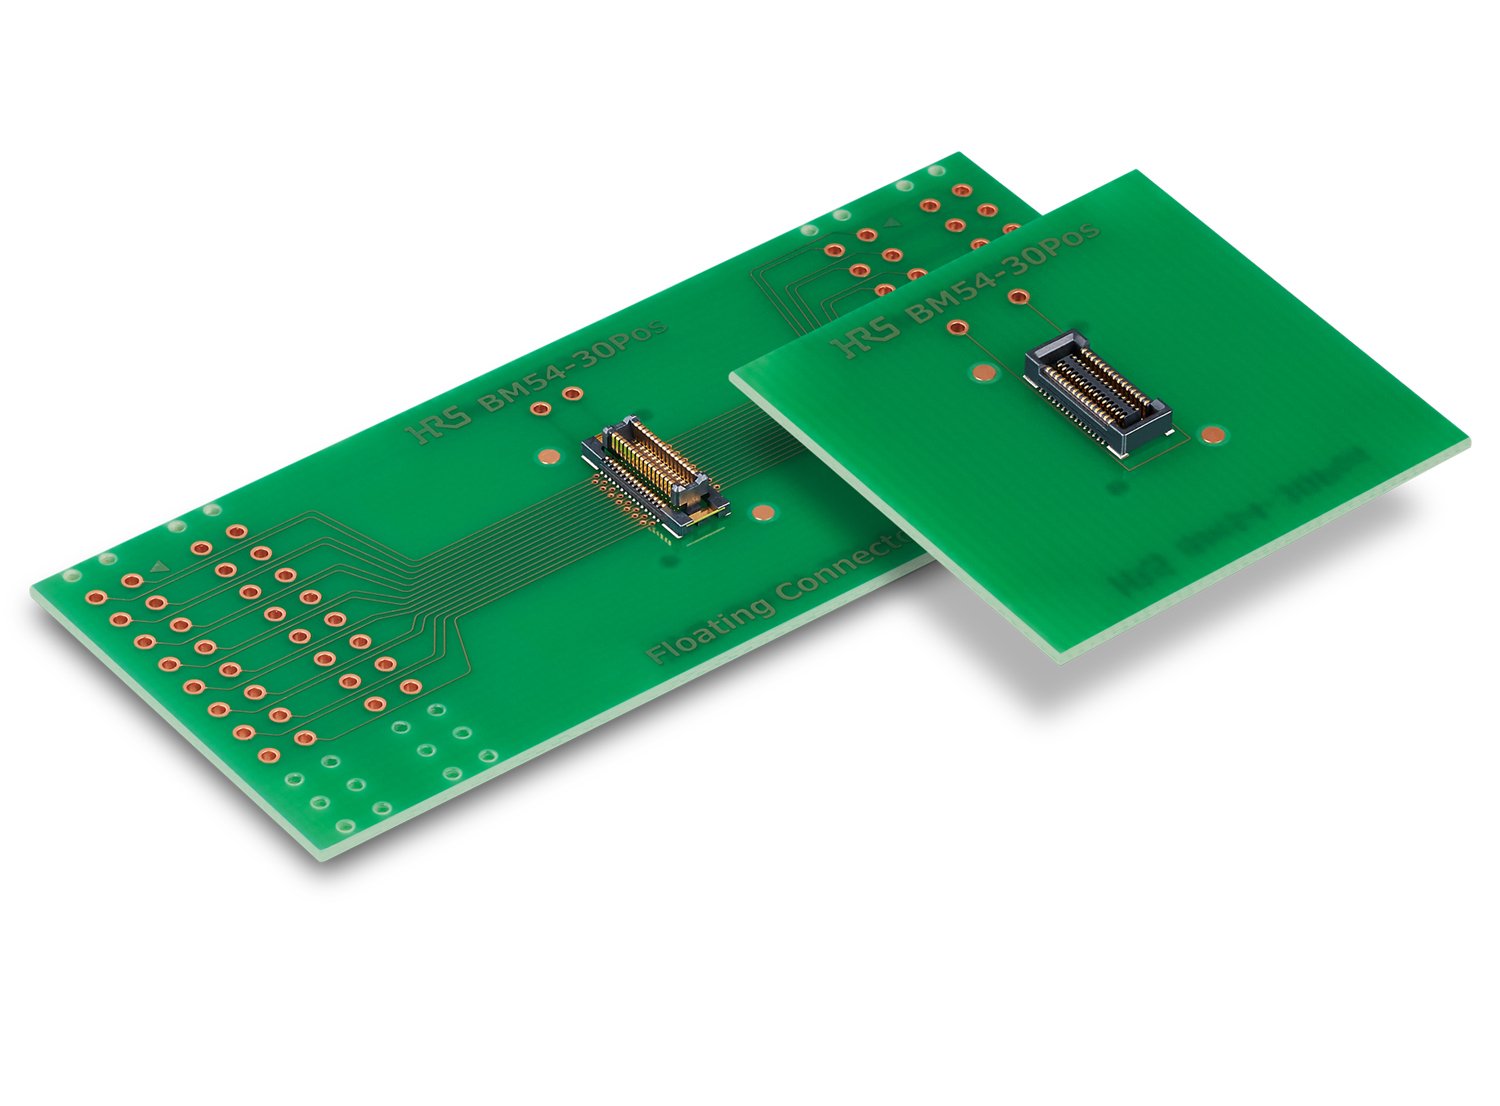 Image of Hirose BM54 Series connector, small floating board-to-board connector with high heat resistance for automotive applications.